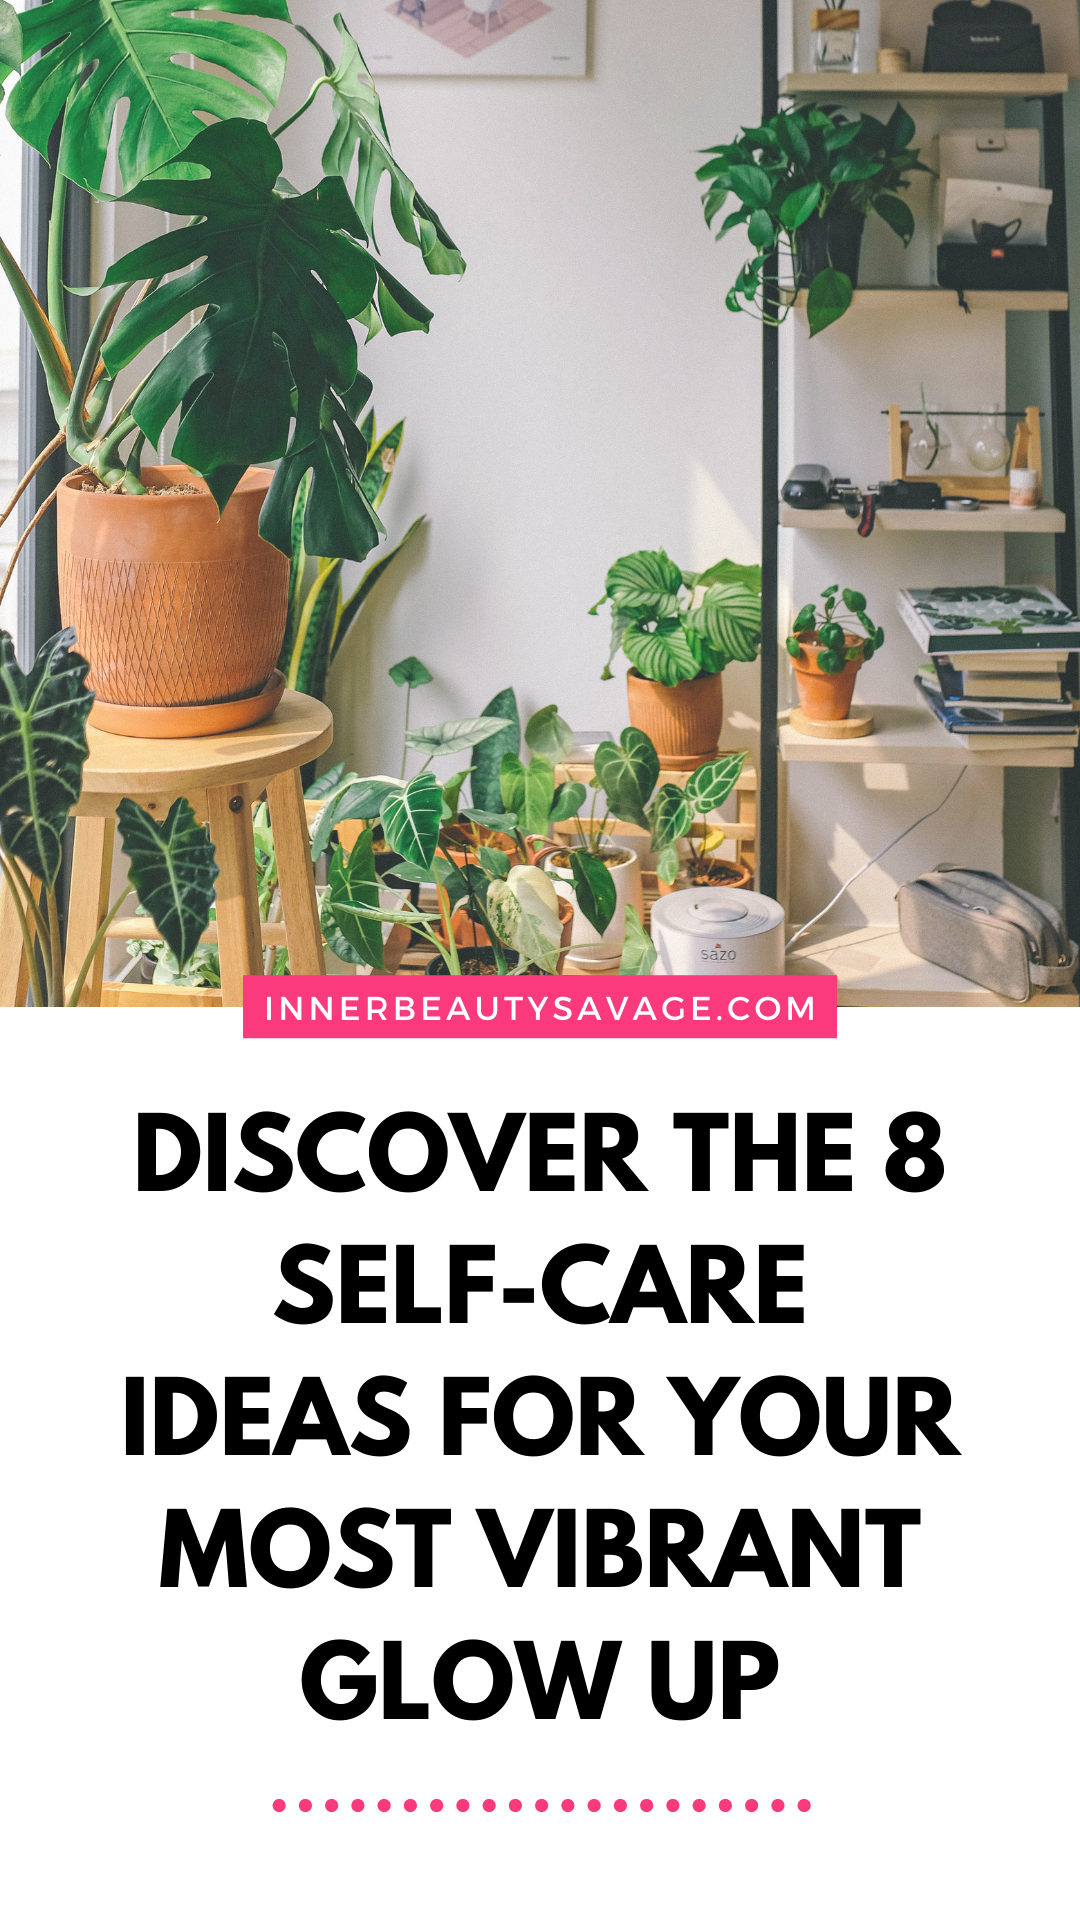 self-care tips for your most vibrant glow-up